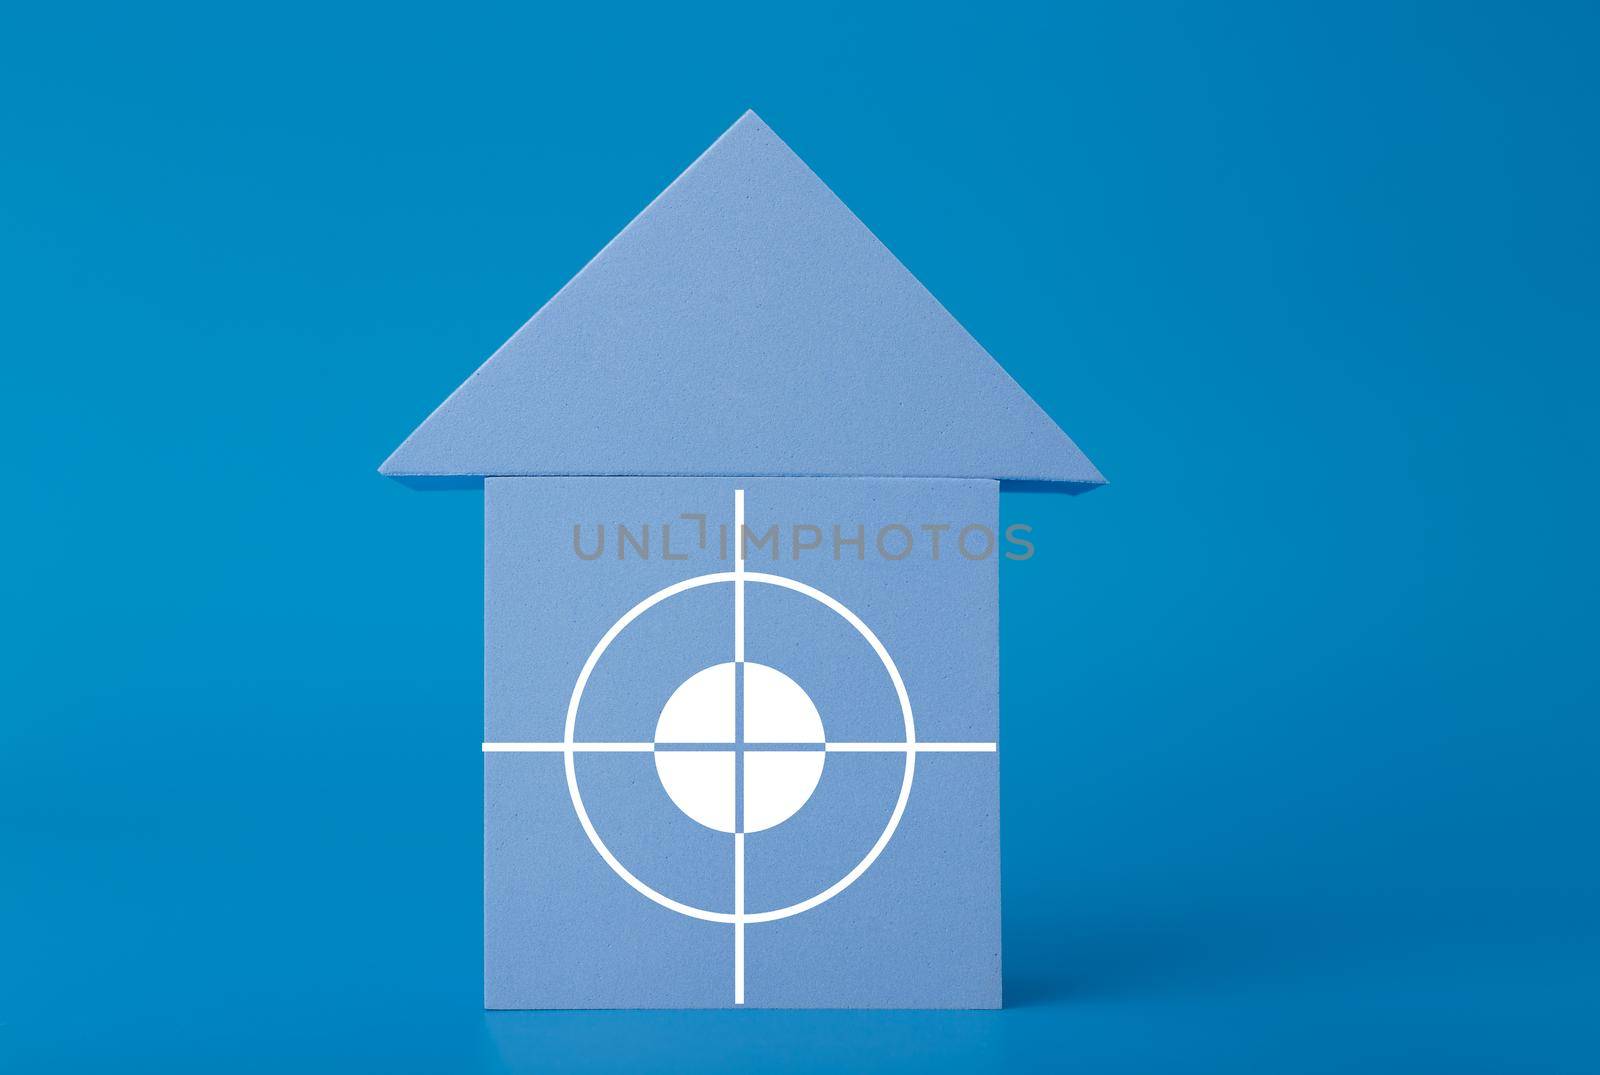 Mortgage, loan or saving money for home and investing in real estate trendy concept. Blue toy house with white target in the middle against blue background with copy space